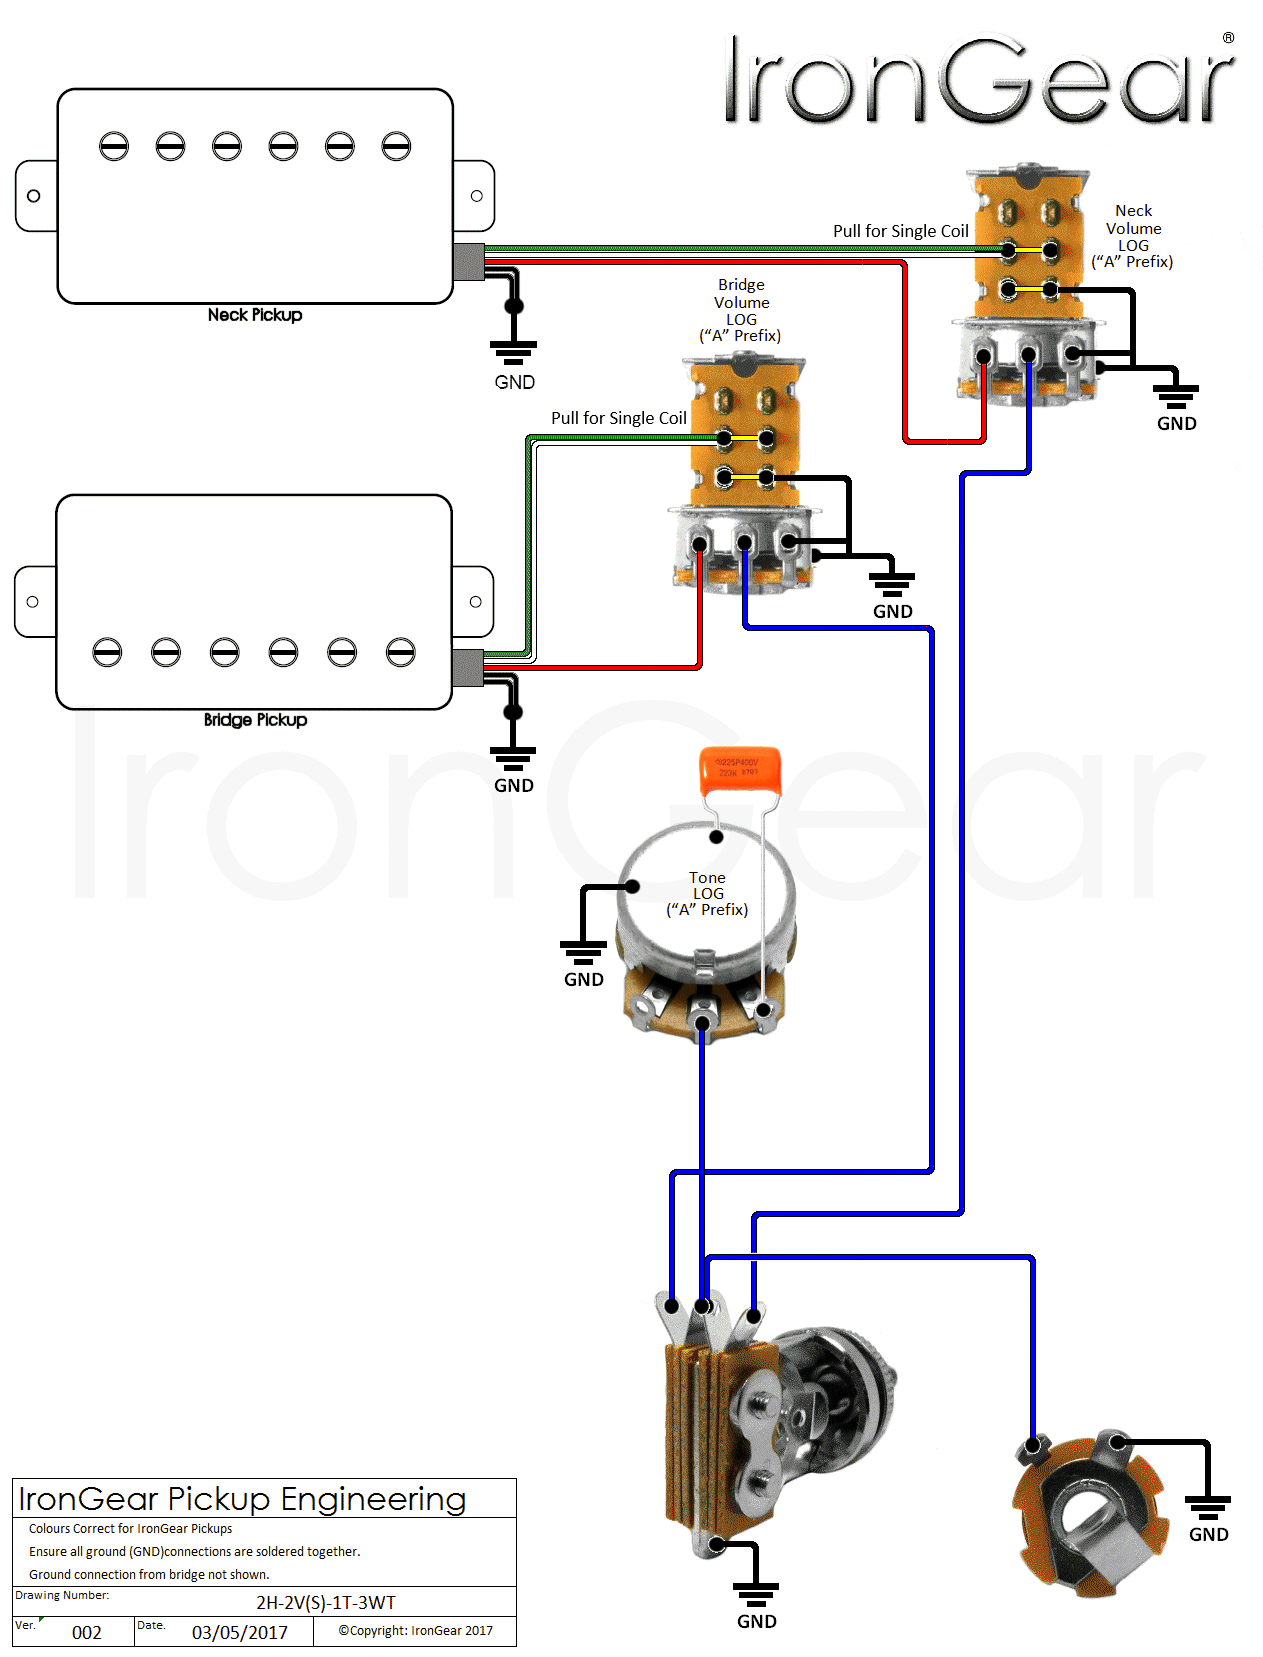 Guitar Wiring Diagram Series Parallel from www.irongear.co.uk